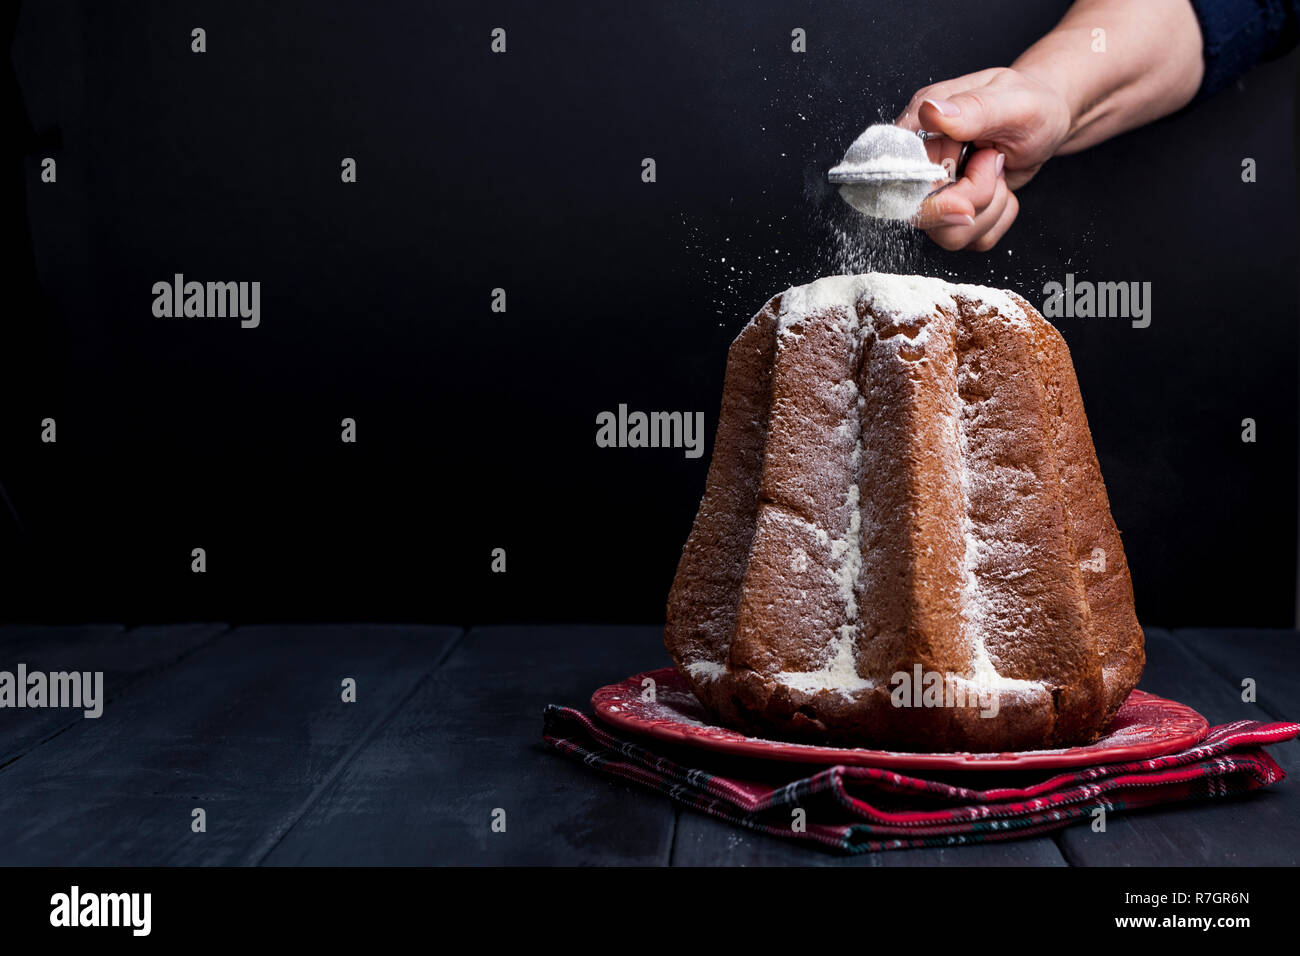 https://c8.alamy.com/comp/R7GR6N/christmas-baking-in-italy-delicious-festive-bread-with-powdered-sugar-and-lemon-cream-view-on-black-background-free-space-for-text-R7GR6N.jpg